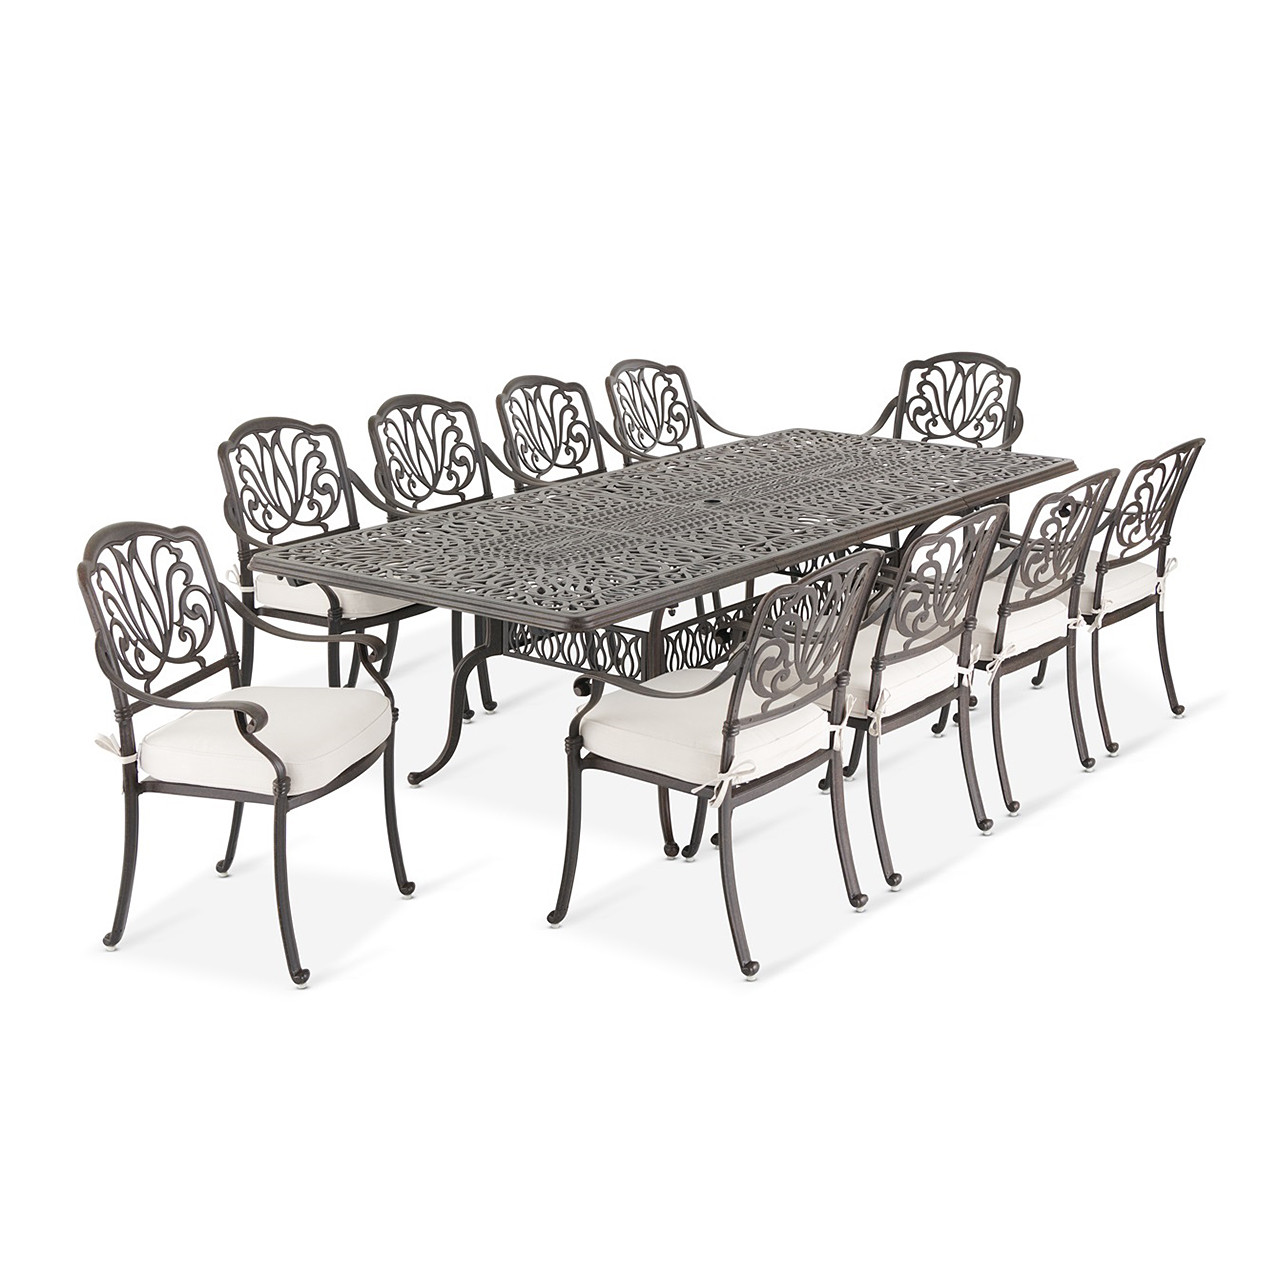 Cadiz Aged Bronze Cast Aluminum with Cushions 11 Piece Dining Set + 71-103 x 44 in. Double Extension Table